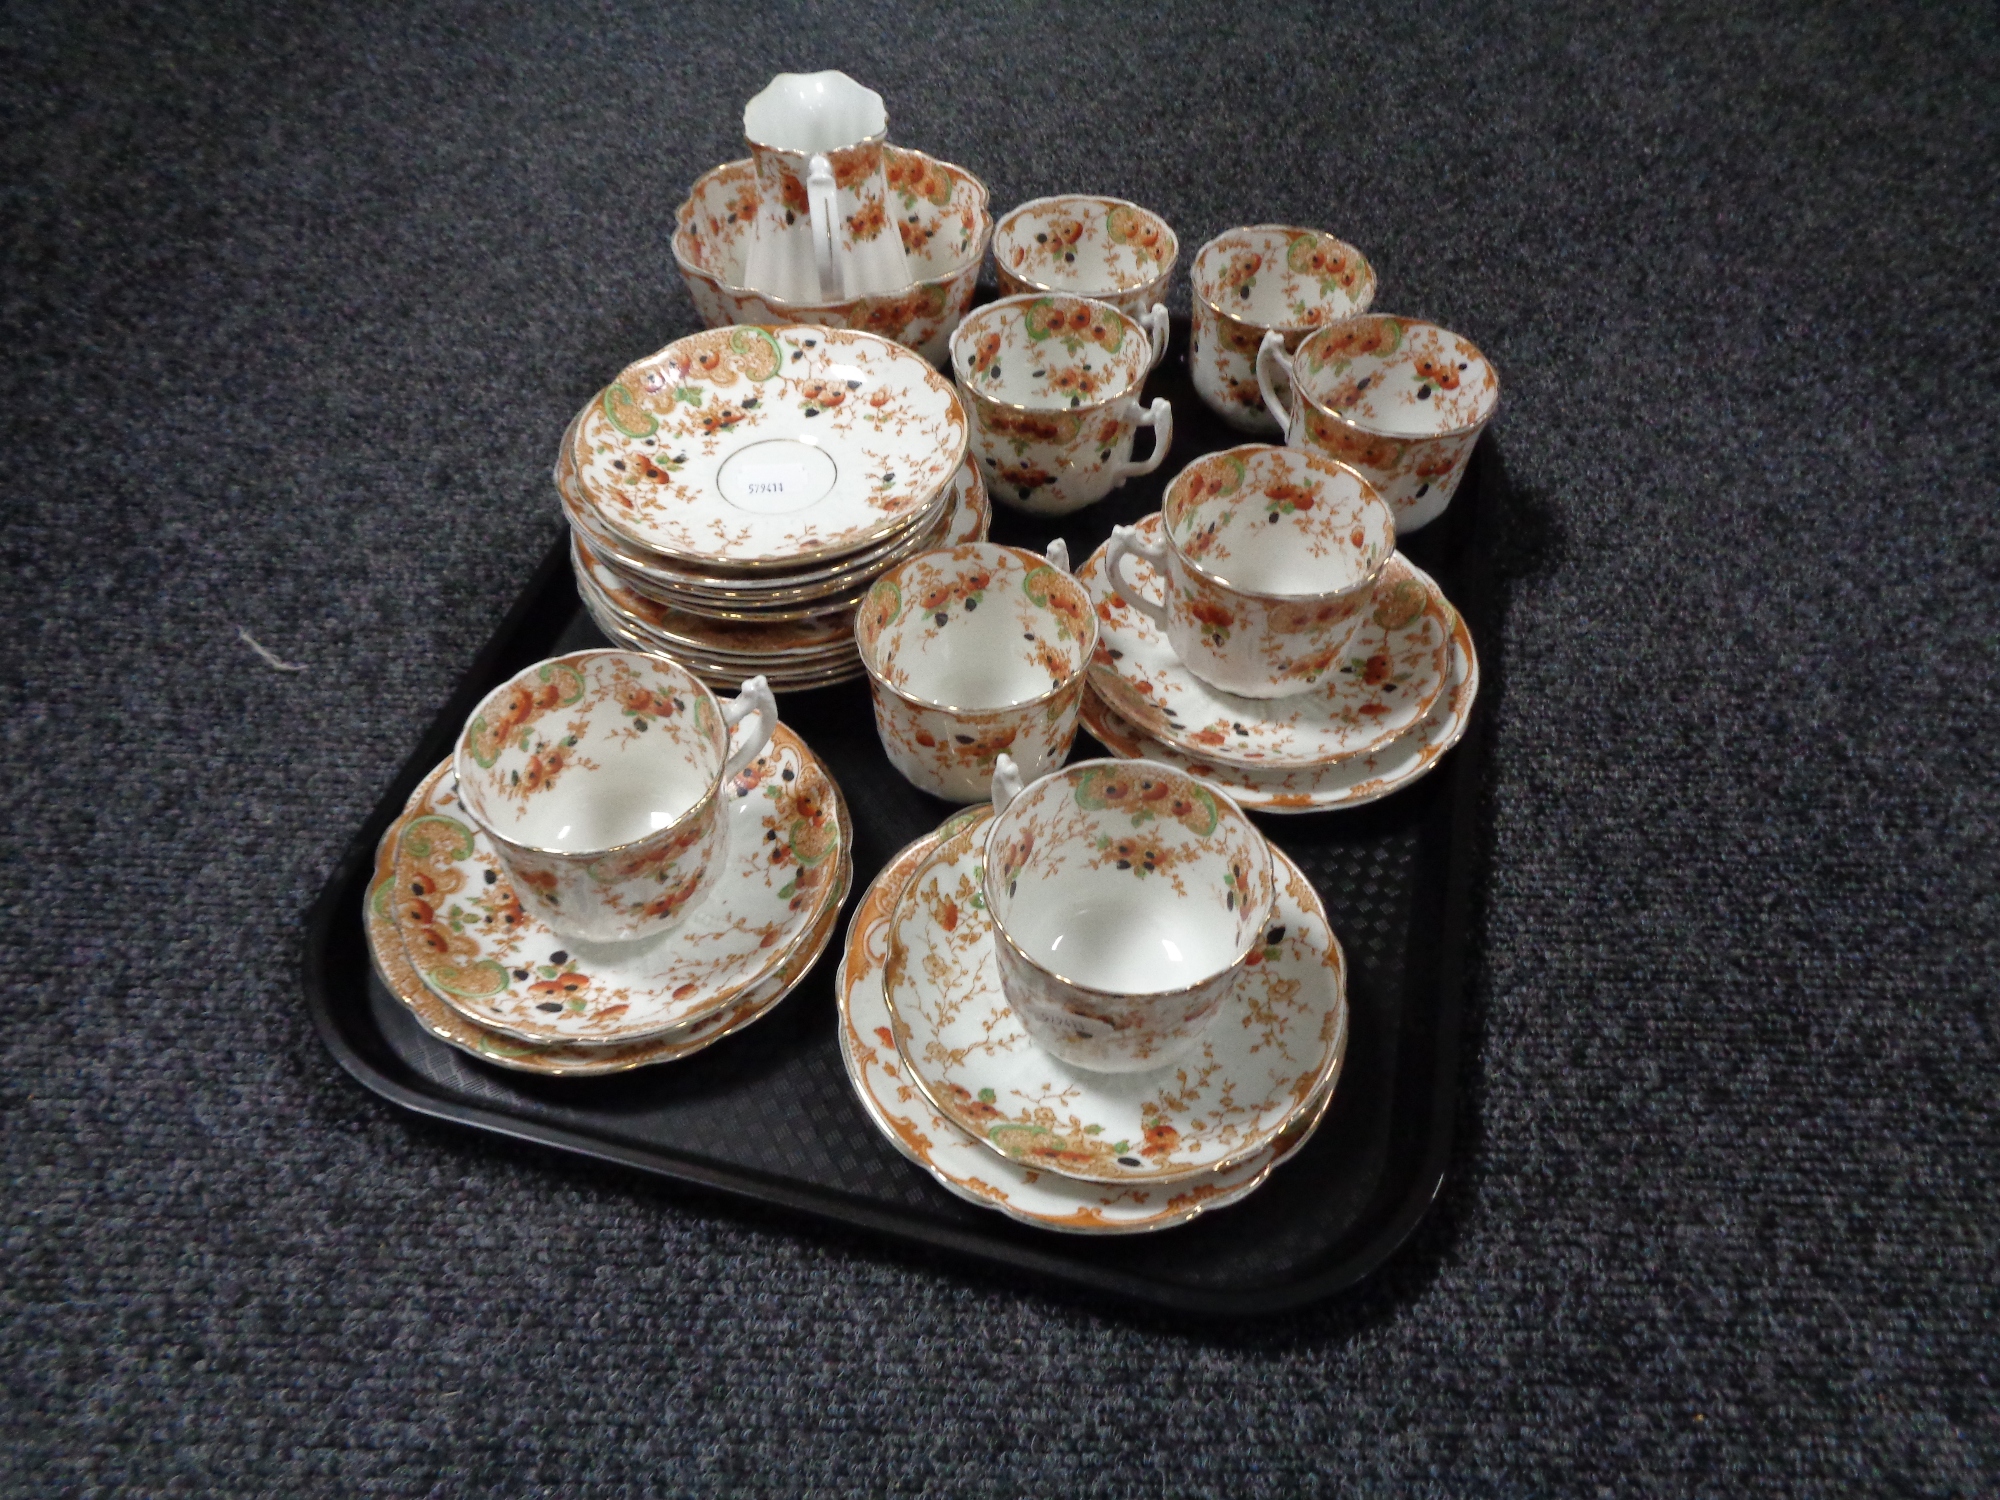 A tray of twenty six pieces of antique Duke floral pattern tea china